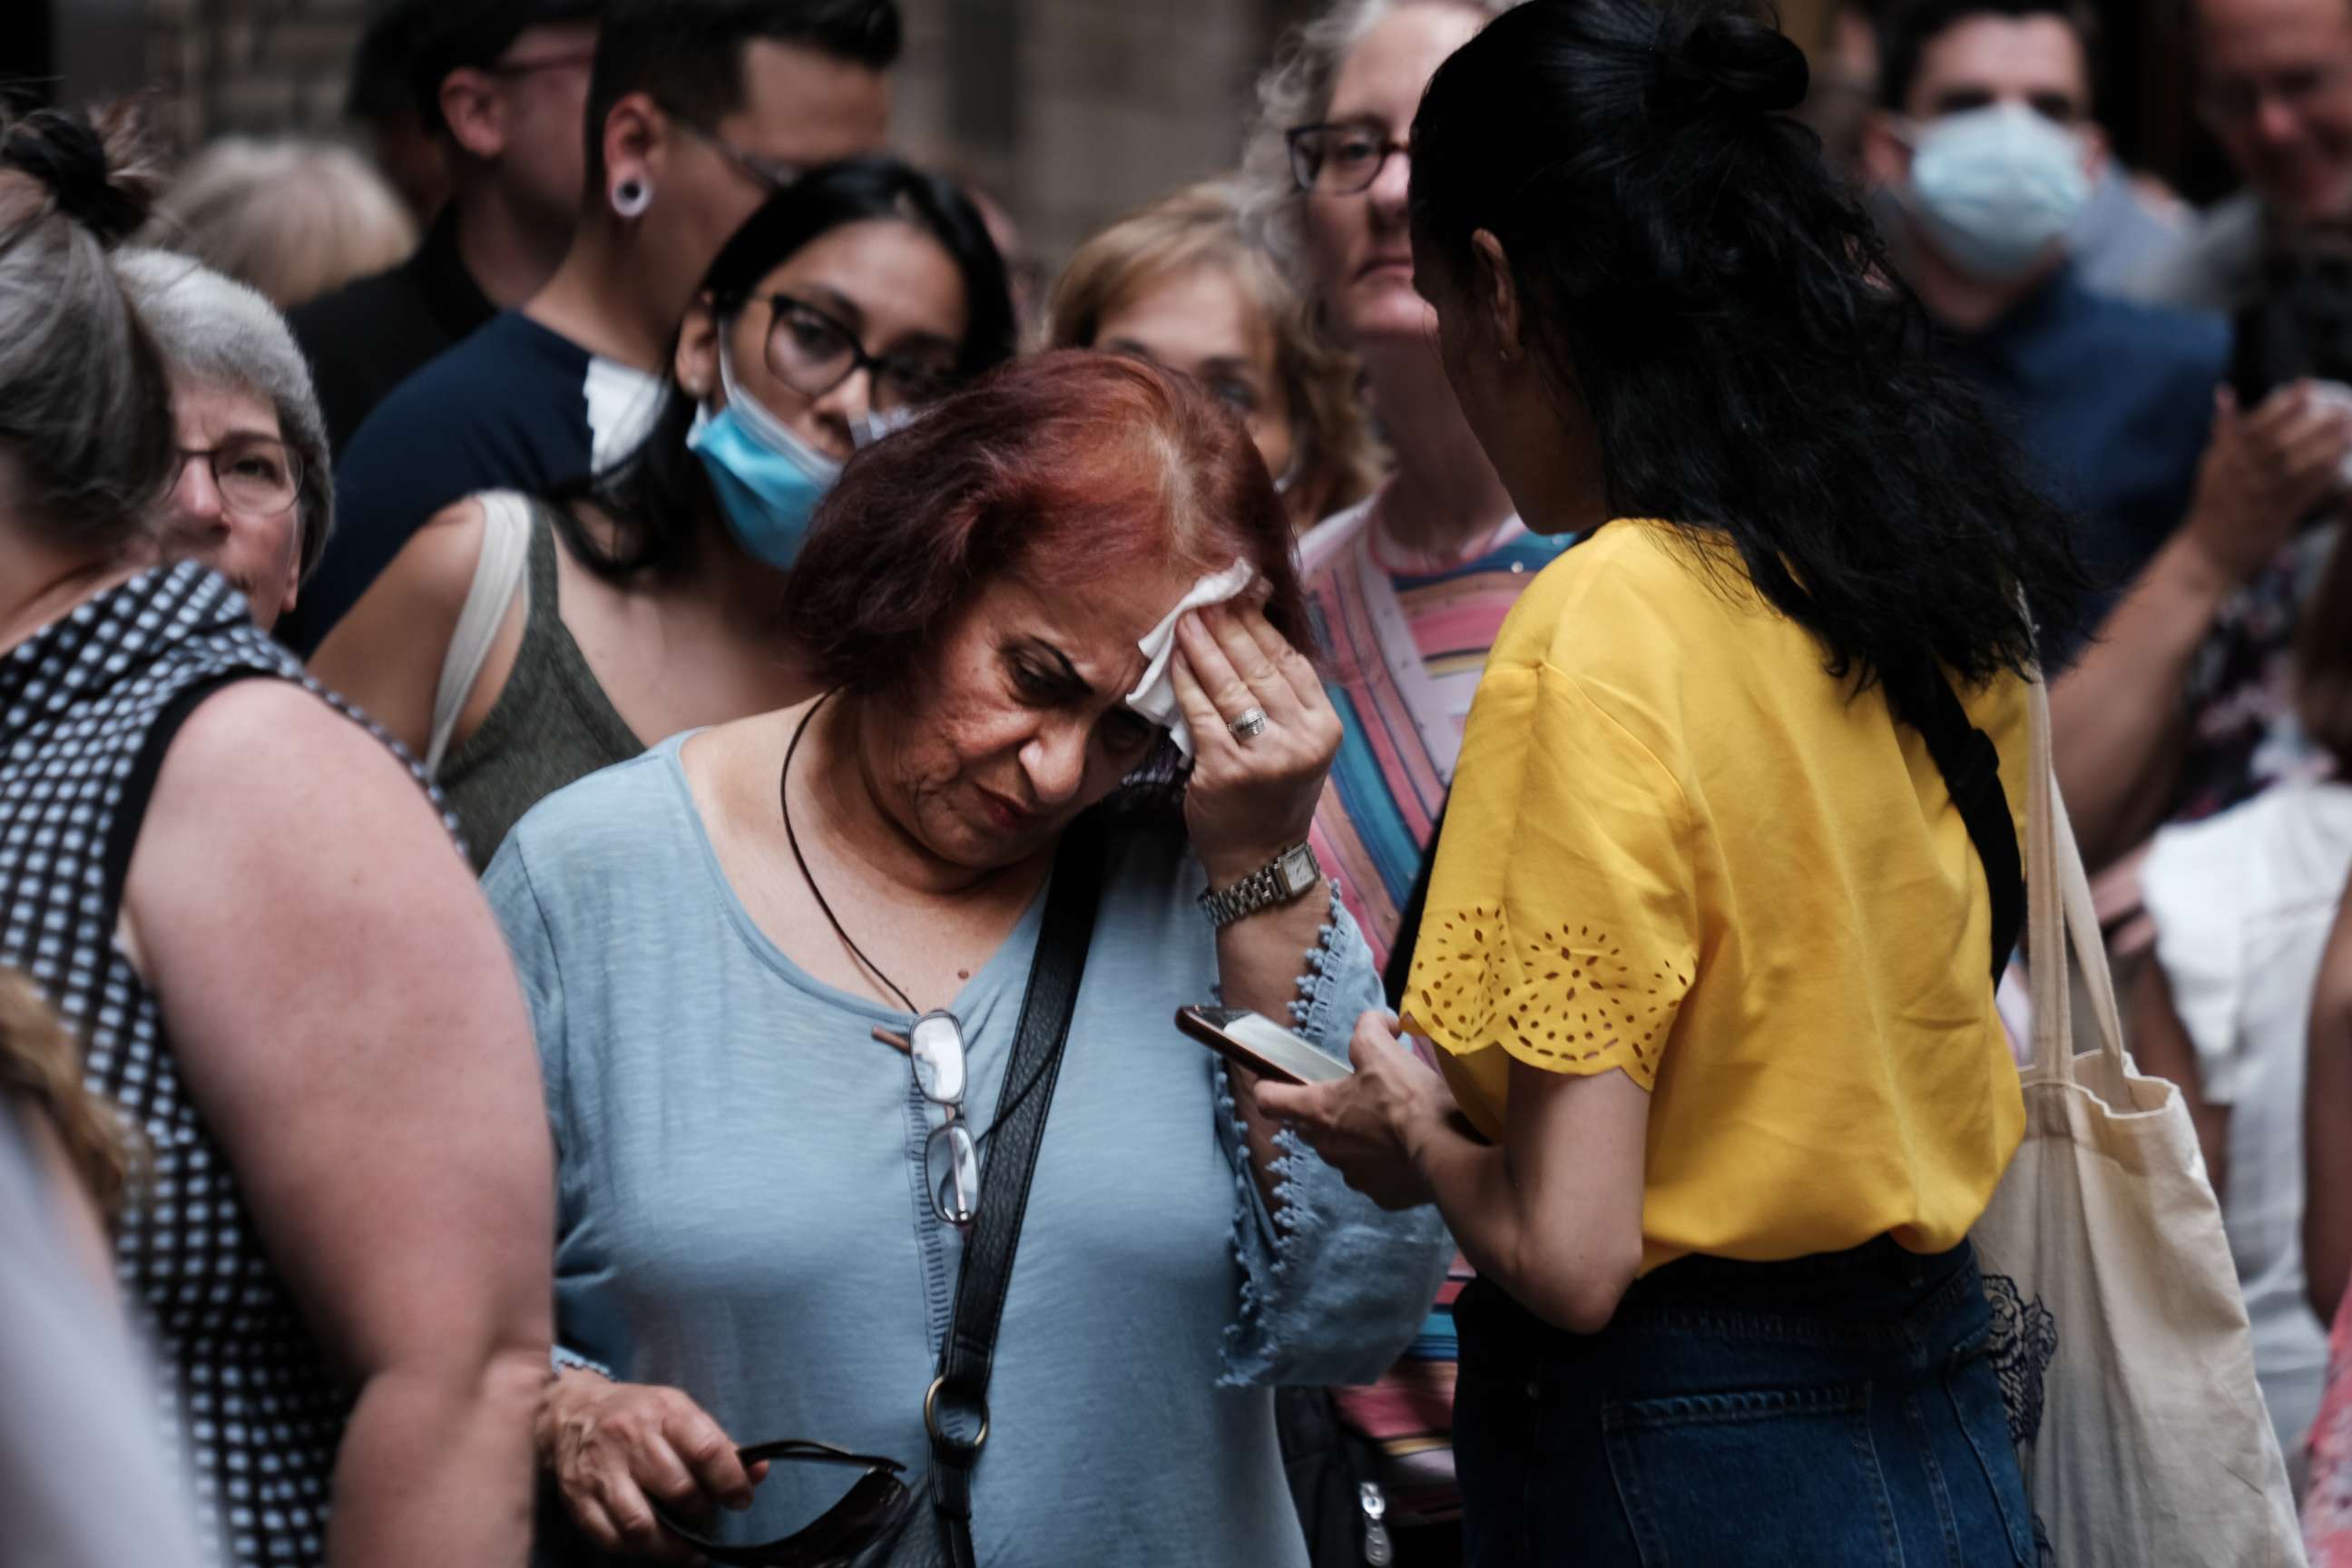 PHOTO: A woman wipes her brow as people wait in line to see Phantom of the Opera in midtown Manhattan as temperatures reach into the 90s on July 21, 2022, in New York City.